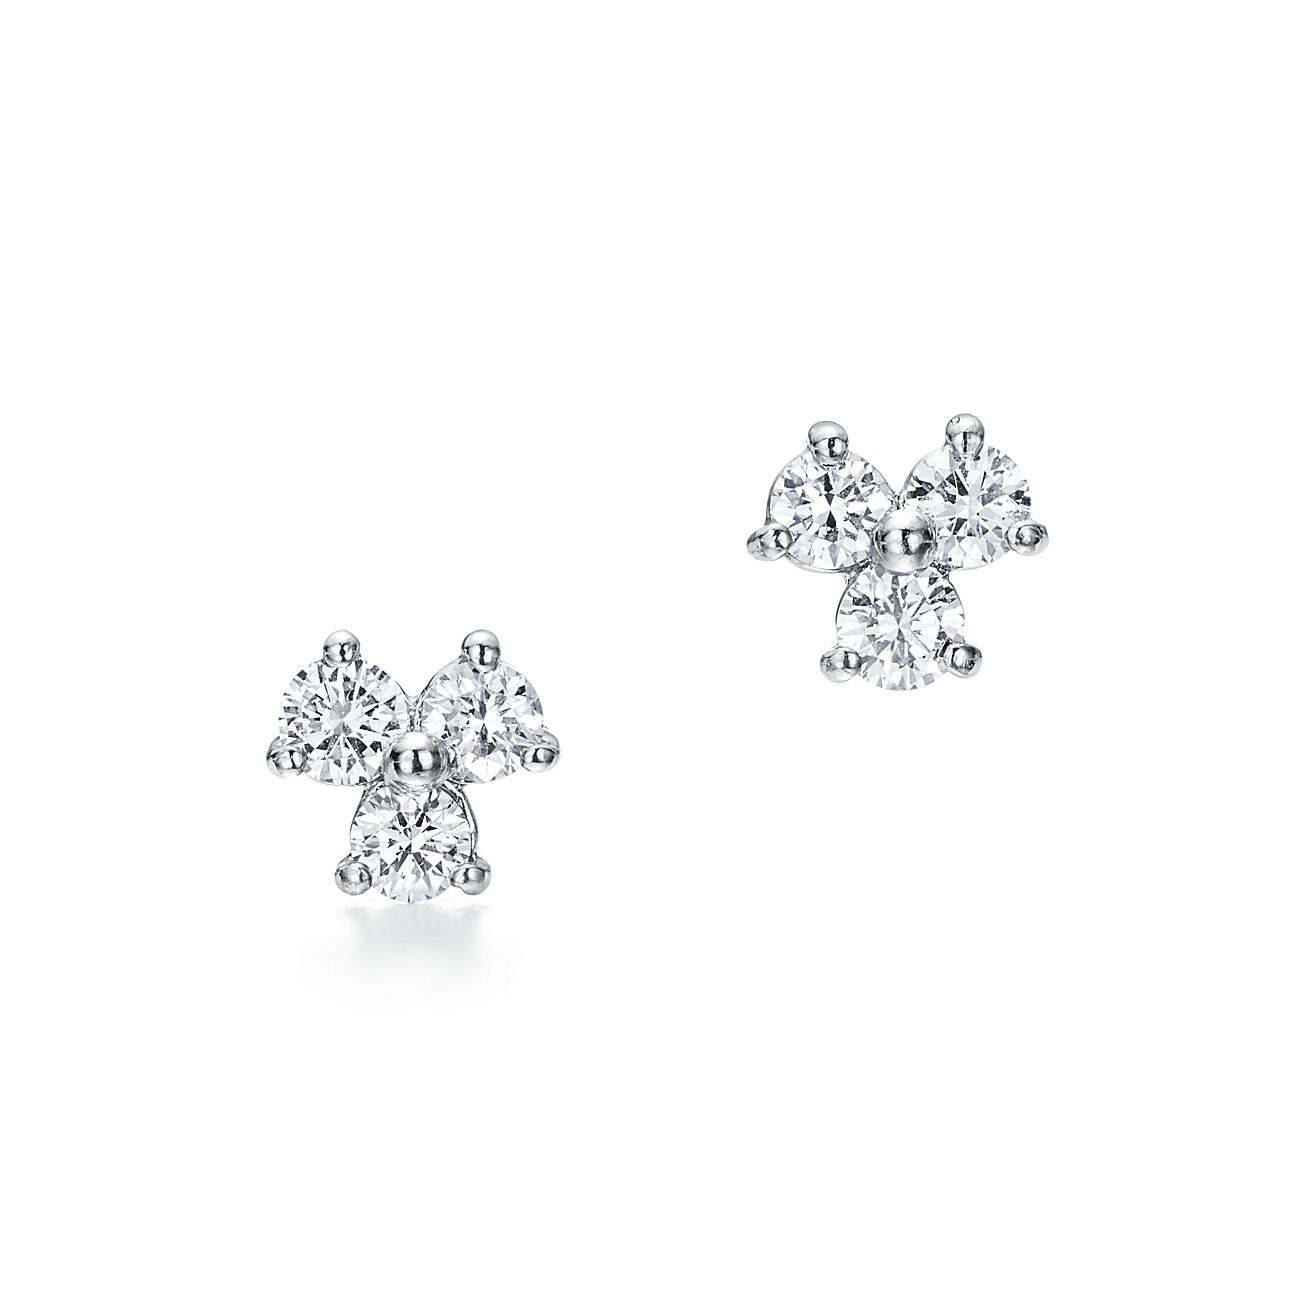 Tiffany Aria earrings in platinum with 